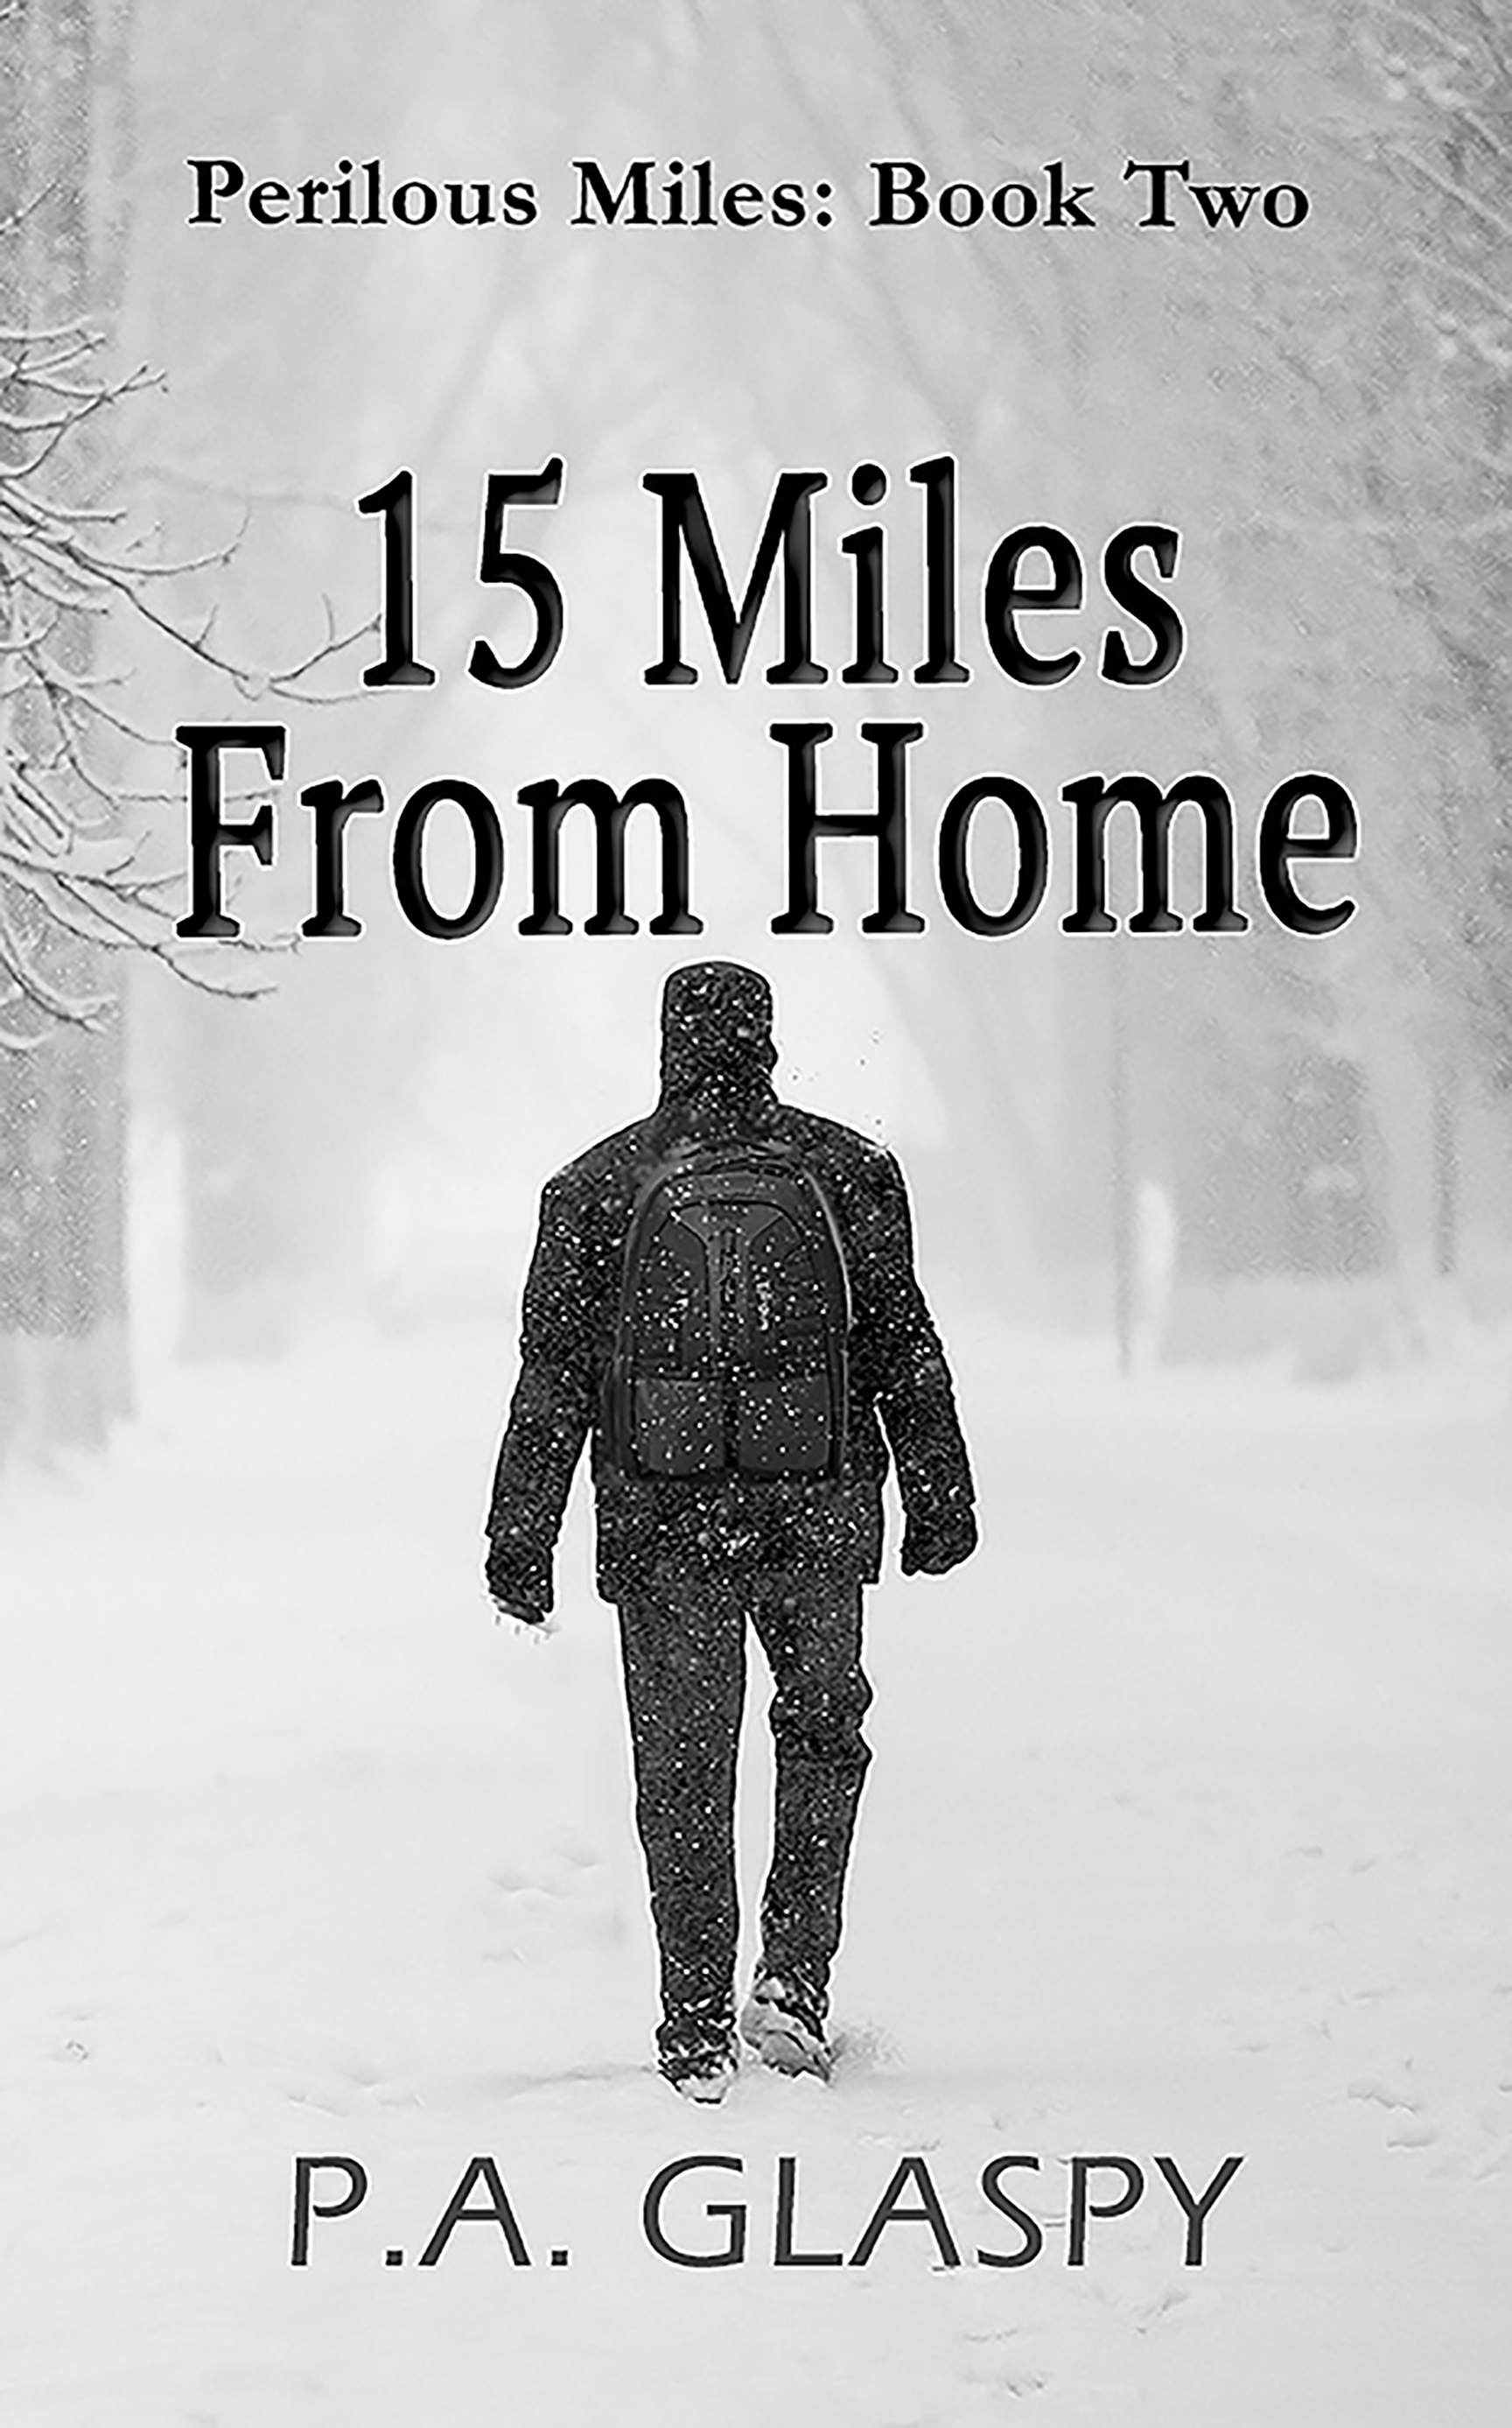  15 Miles From Home - Perilous Miles Book 2